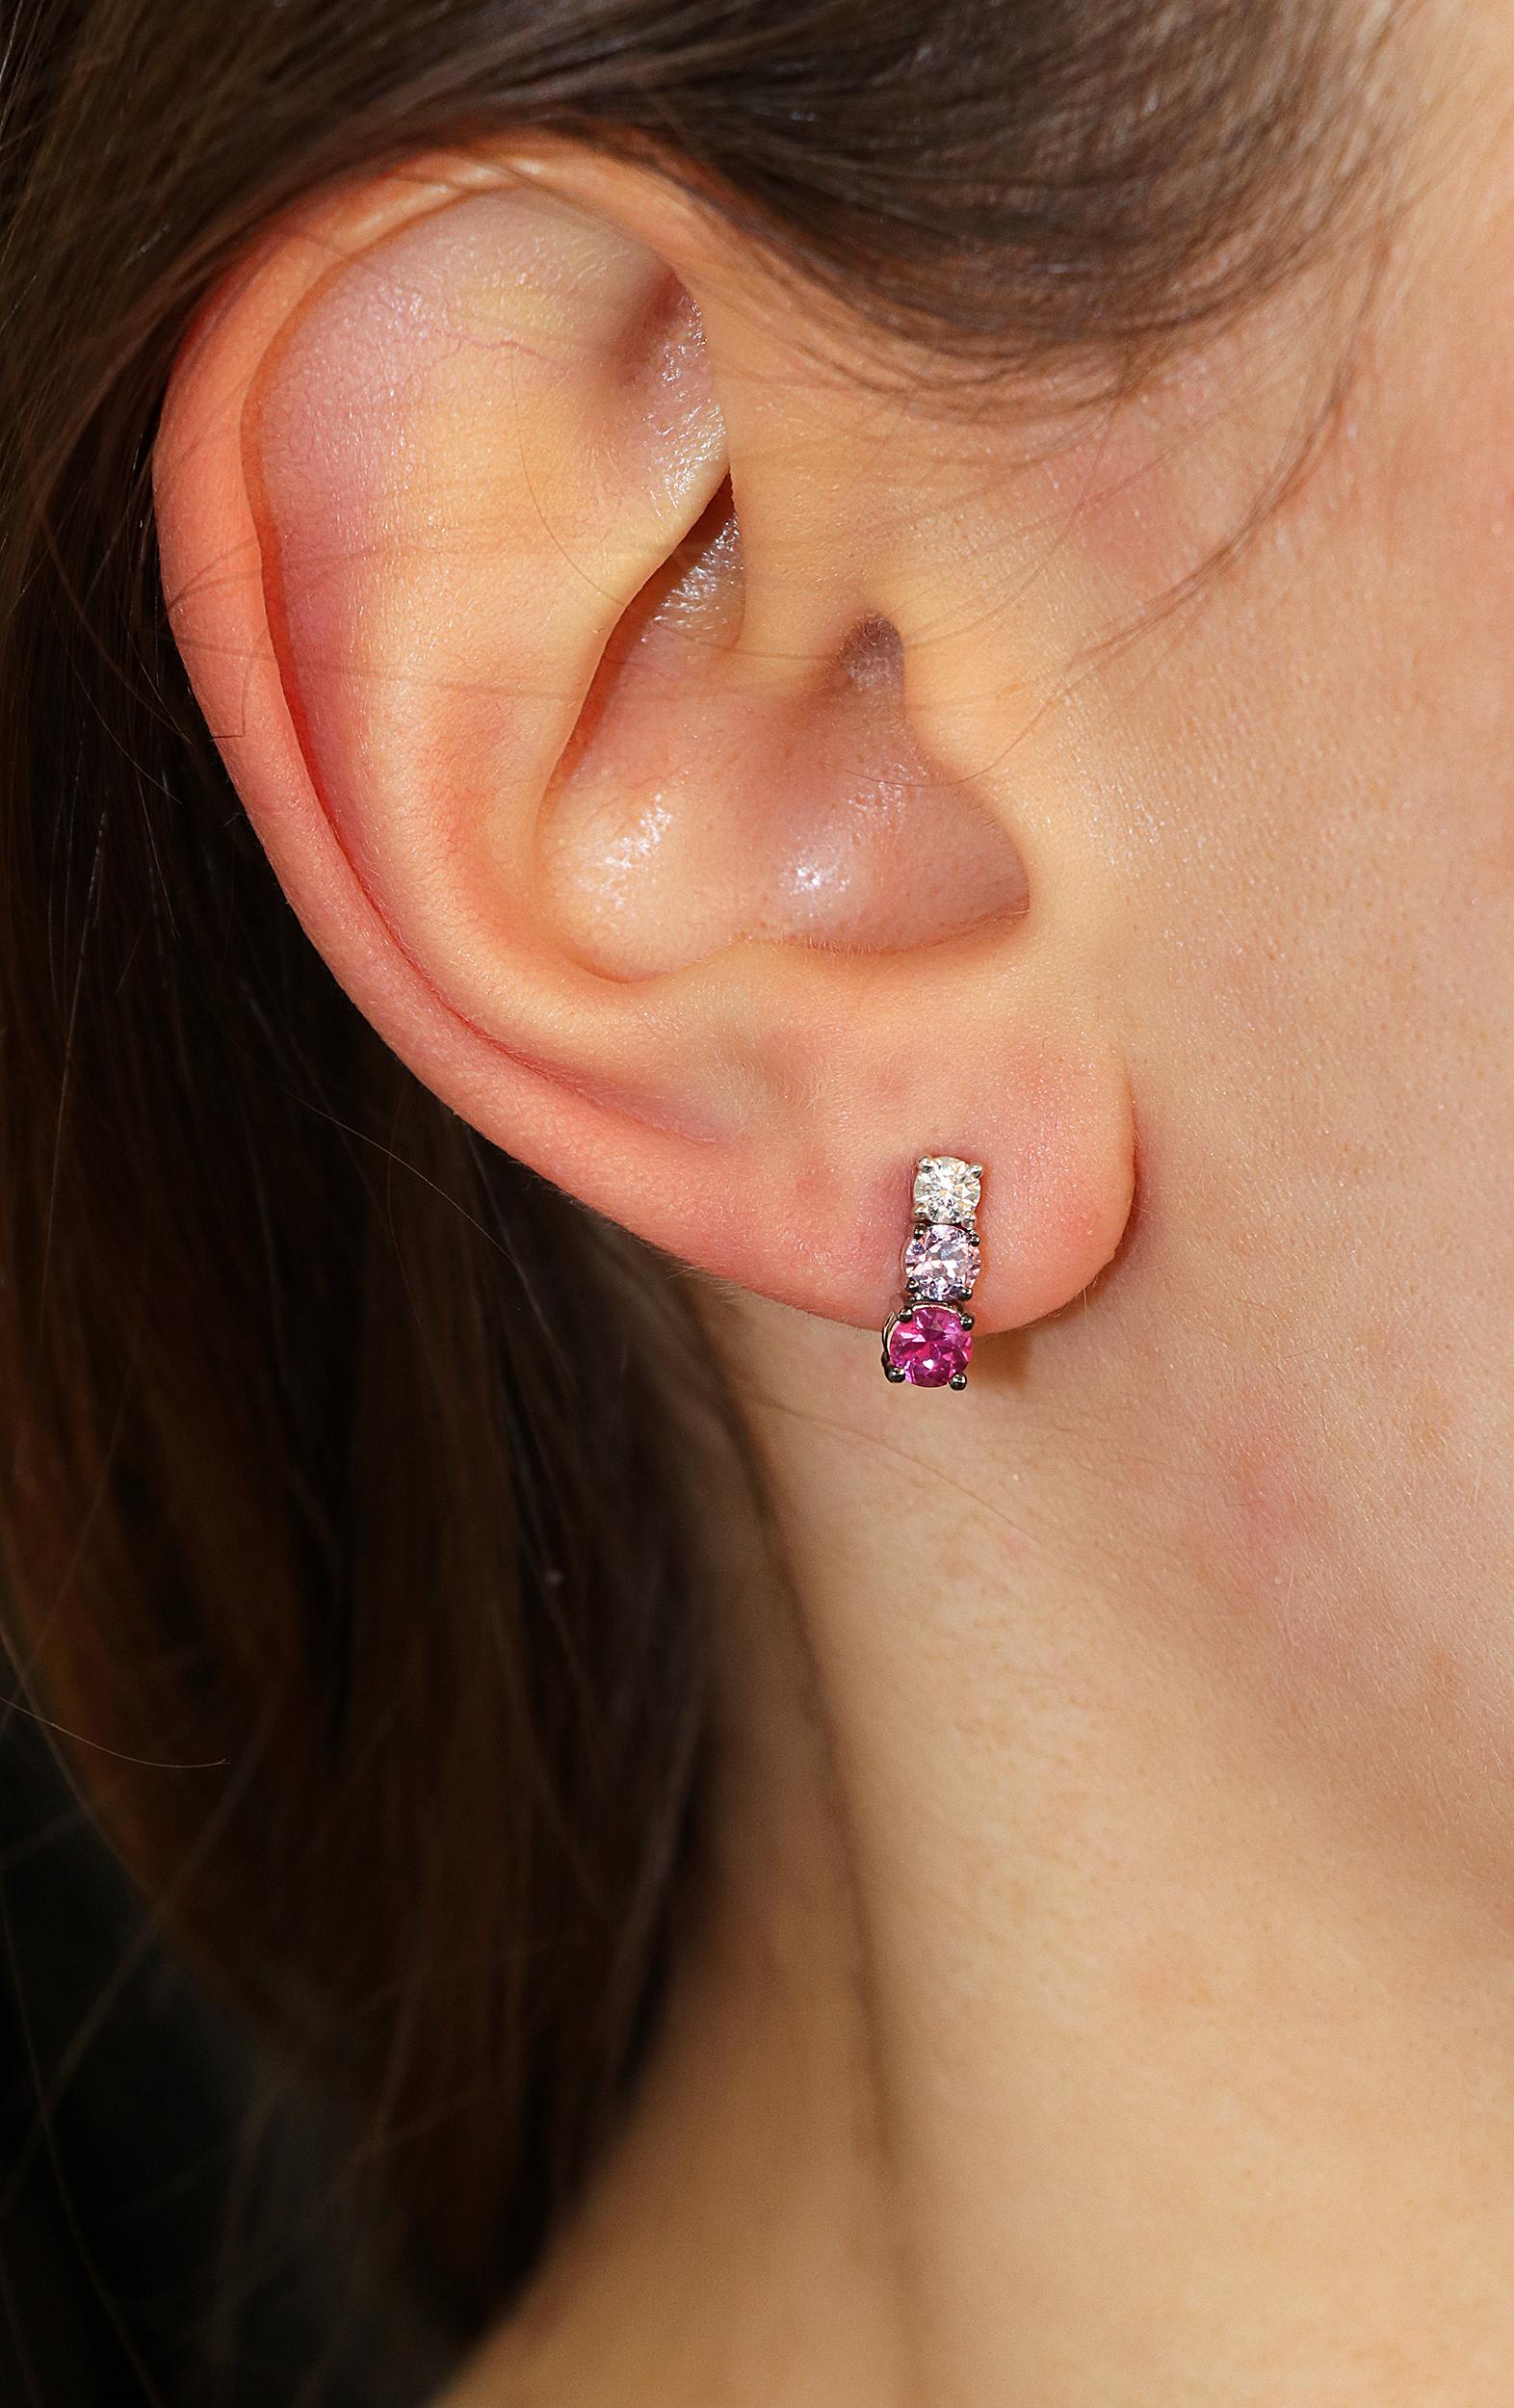 0.21 White GVS Diamonds 0.51 Rubies 0.38 Pink Sapphires 18 Karat Gold Earrings In New Condition For Sale In Valenza, IT